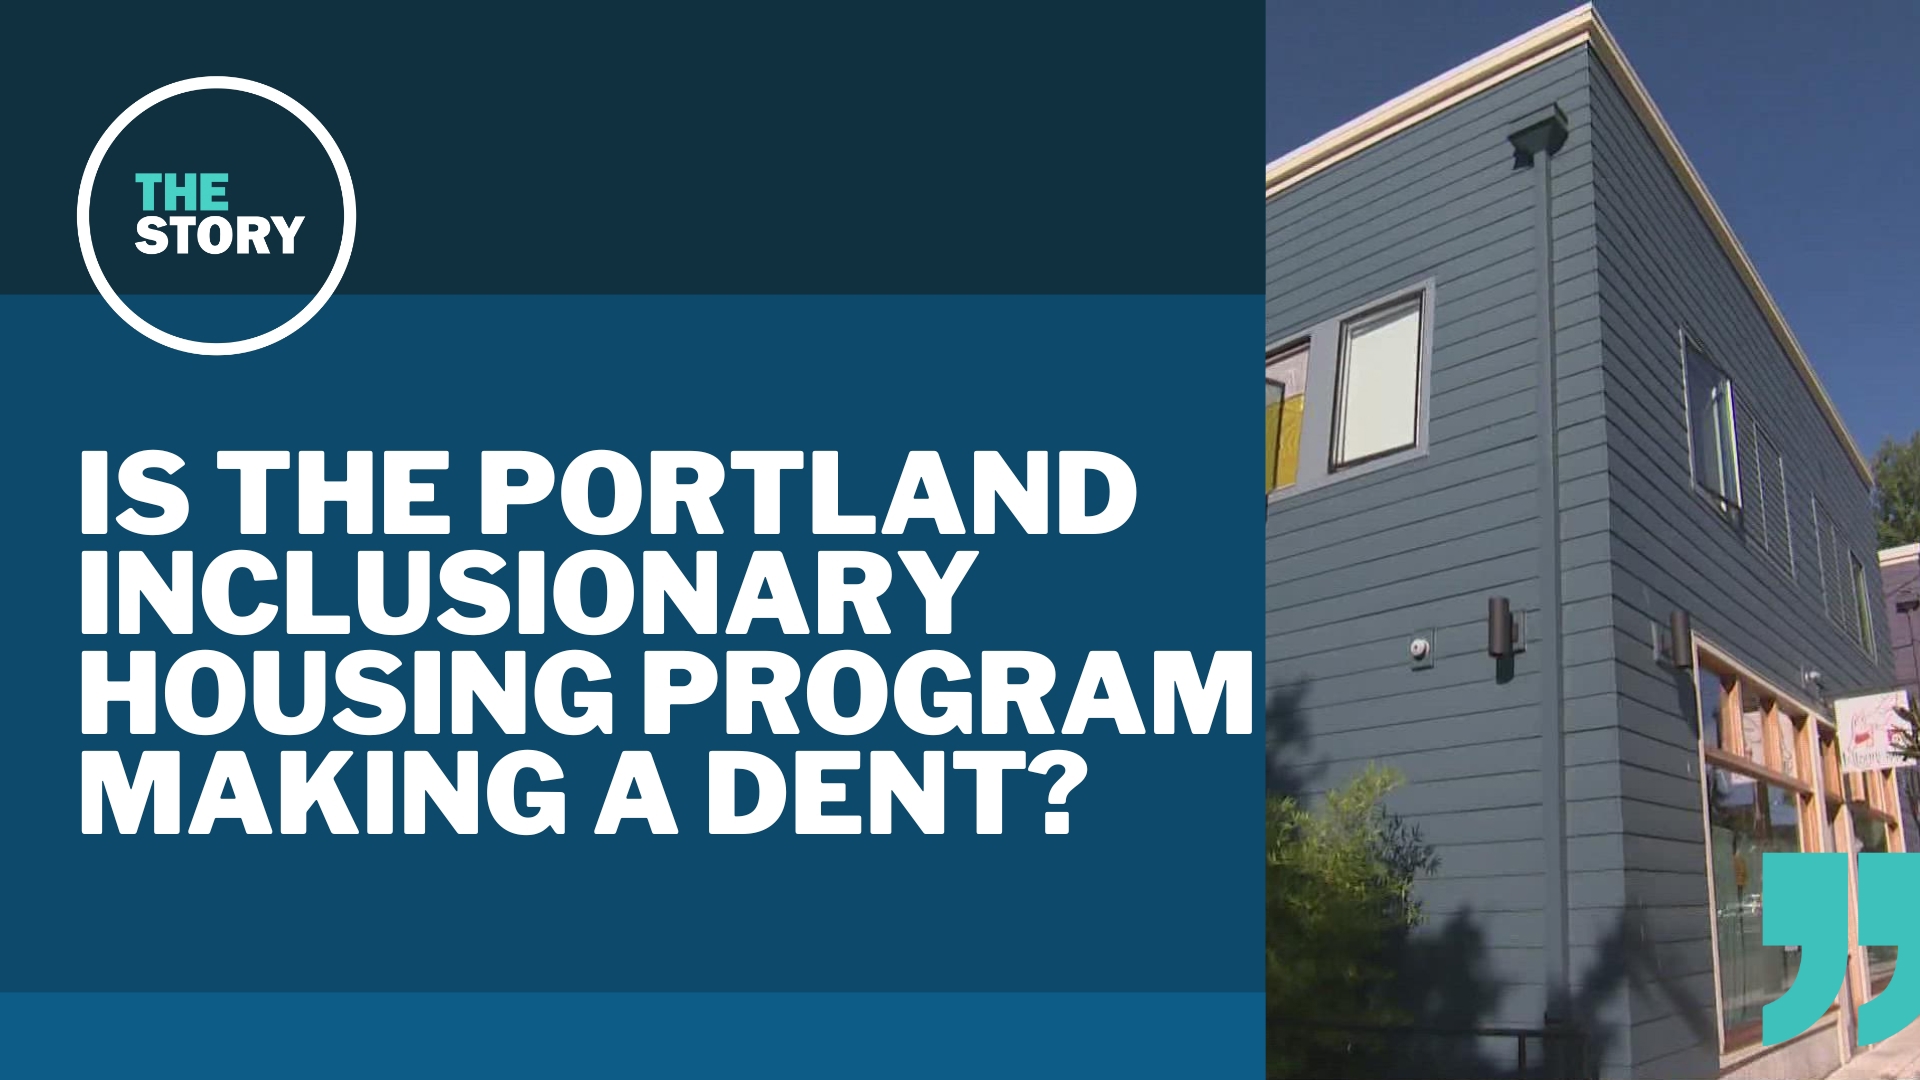 Portland's Inclusionary Housing program is intended to help the city's affordable housing needs, but could instead make it worse, an audit found.